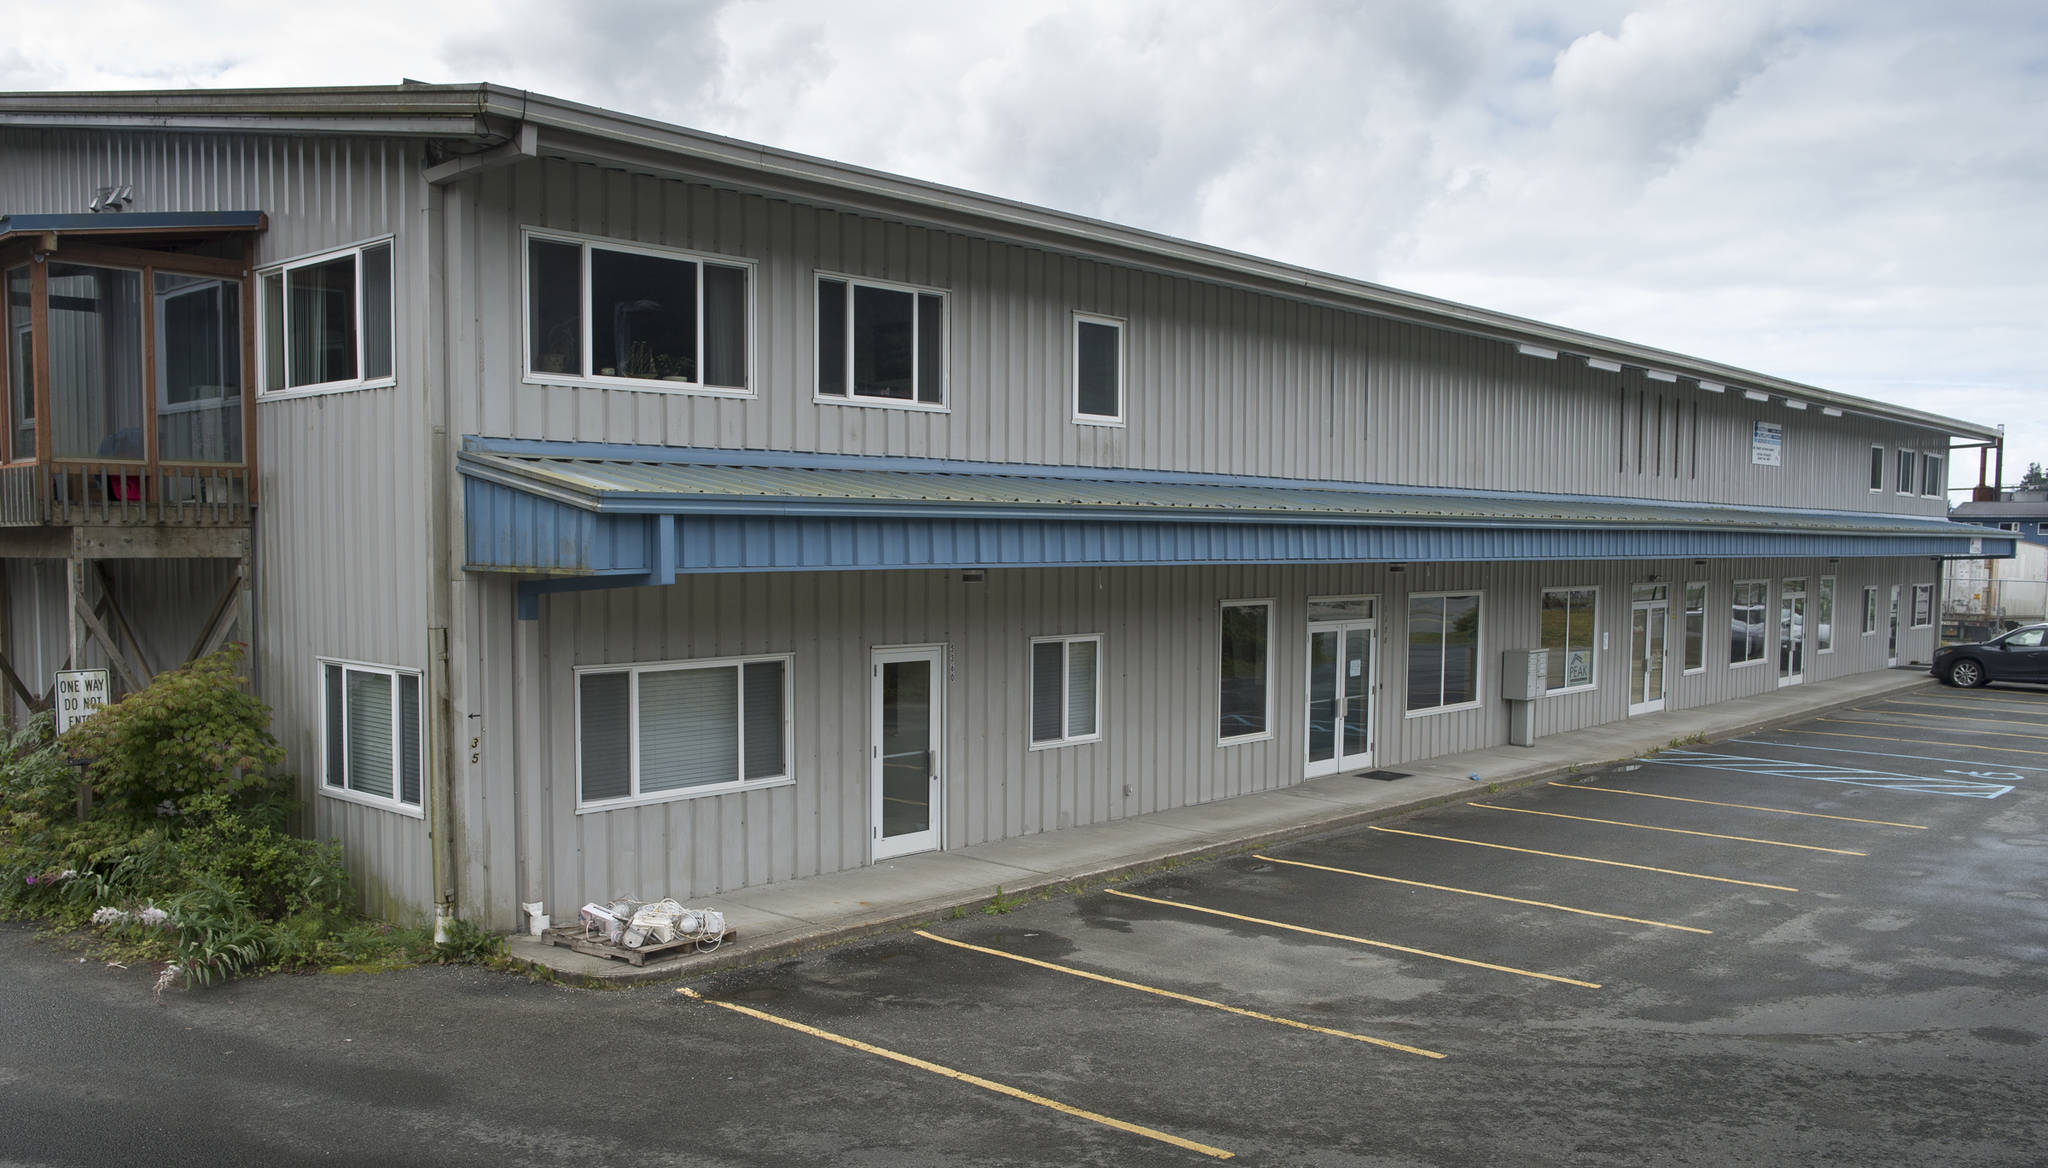 The Alaskan Brewing Company has bought three of the five business units in a building owned by Anchor Electric Company to possibly relocate their tasting room. (Michael Penn | Juneau Empire)